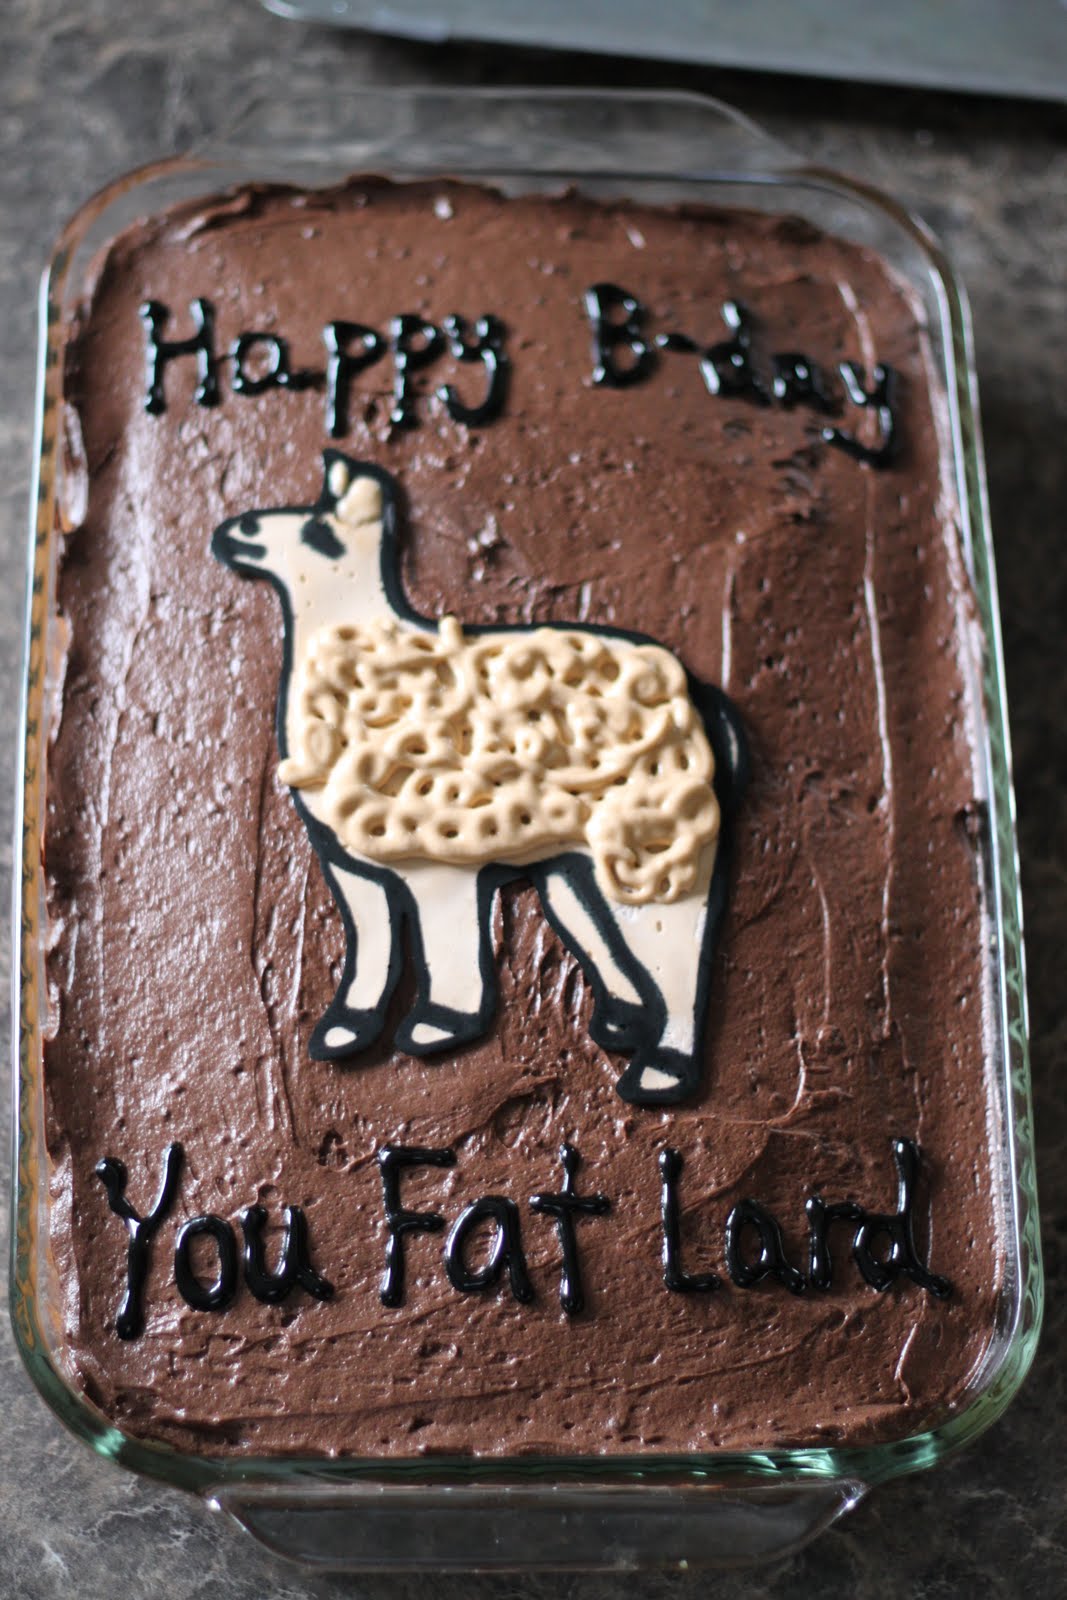 12 Uncomfortable And Offensive Cakes You Won't Believe Exist